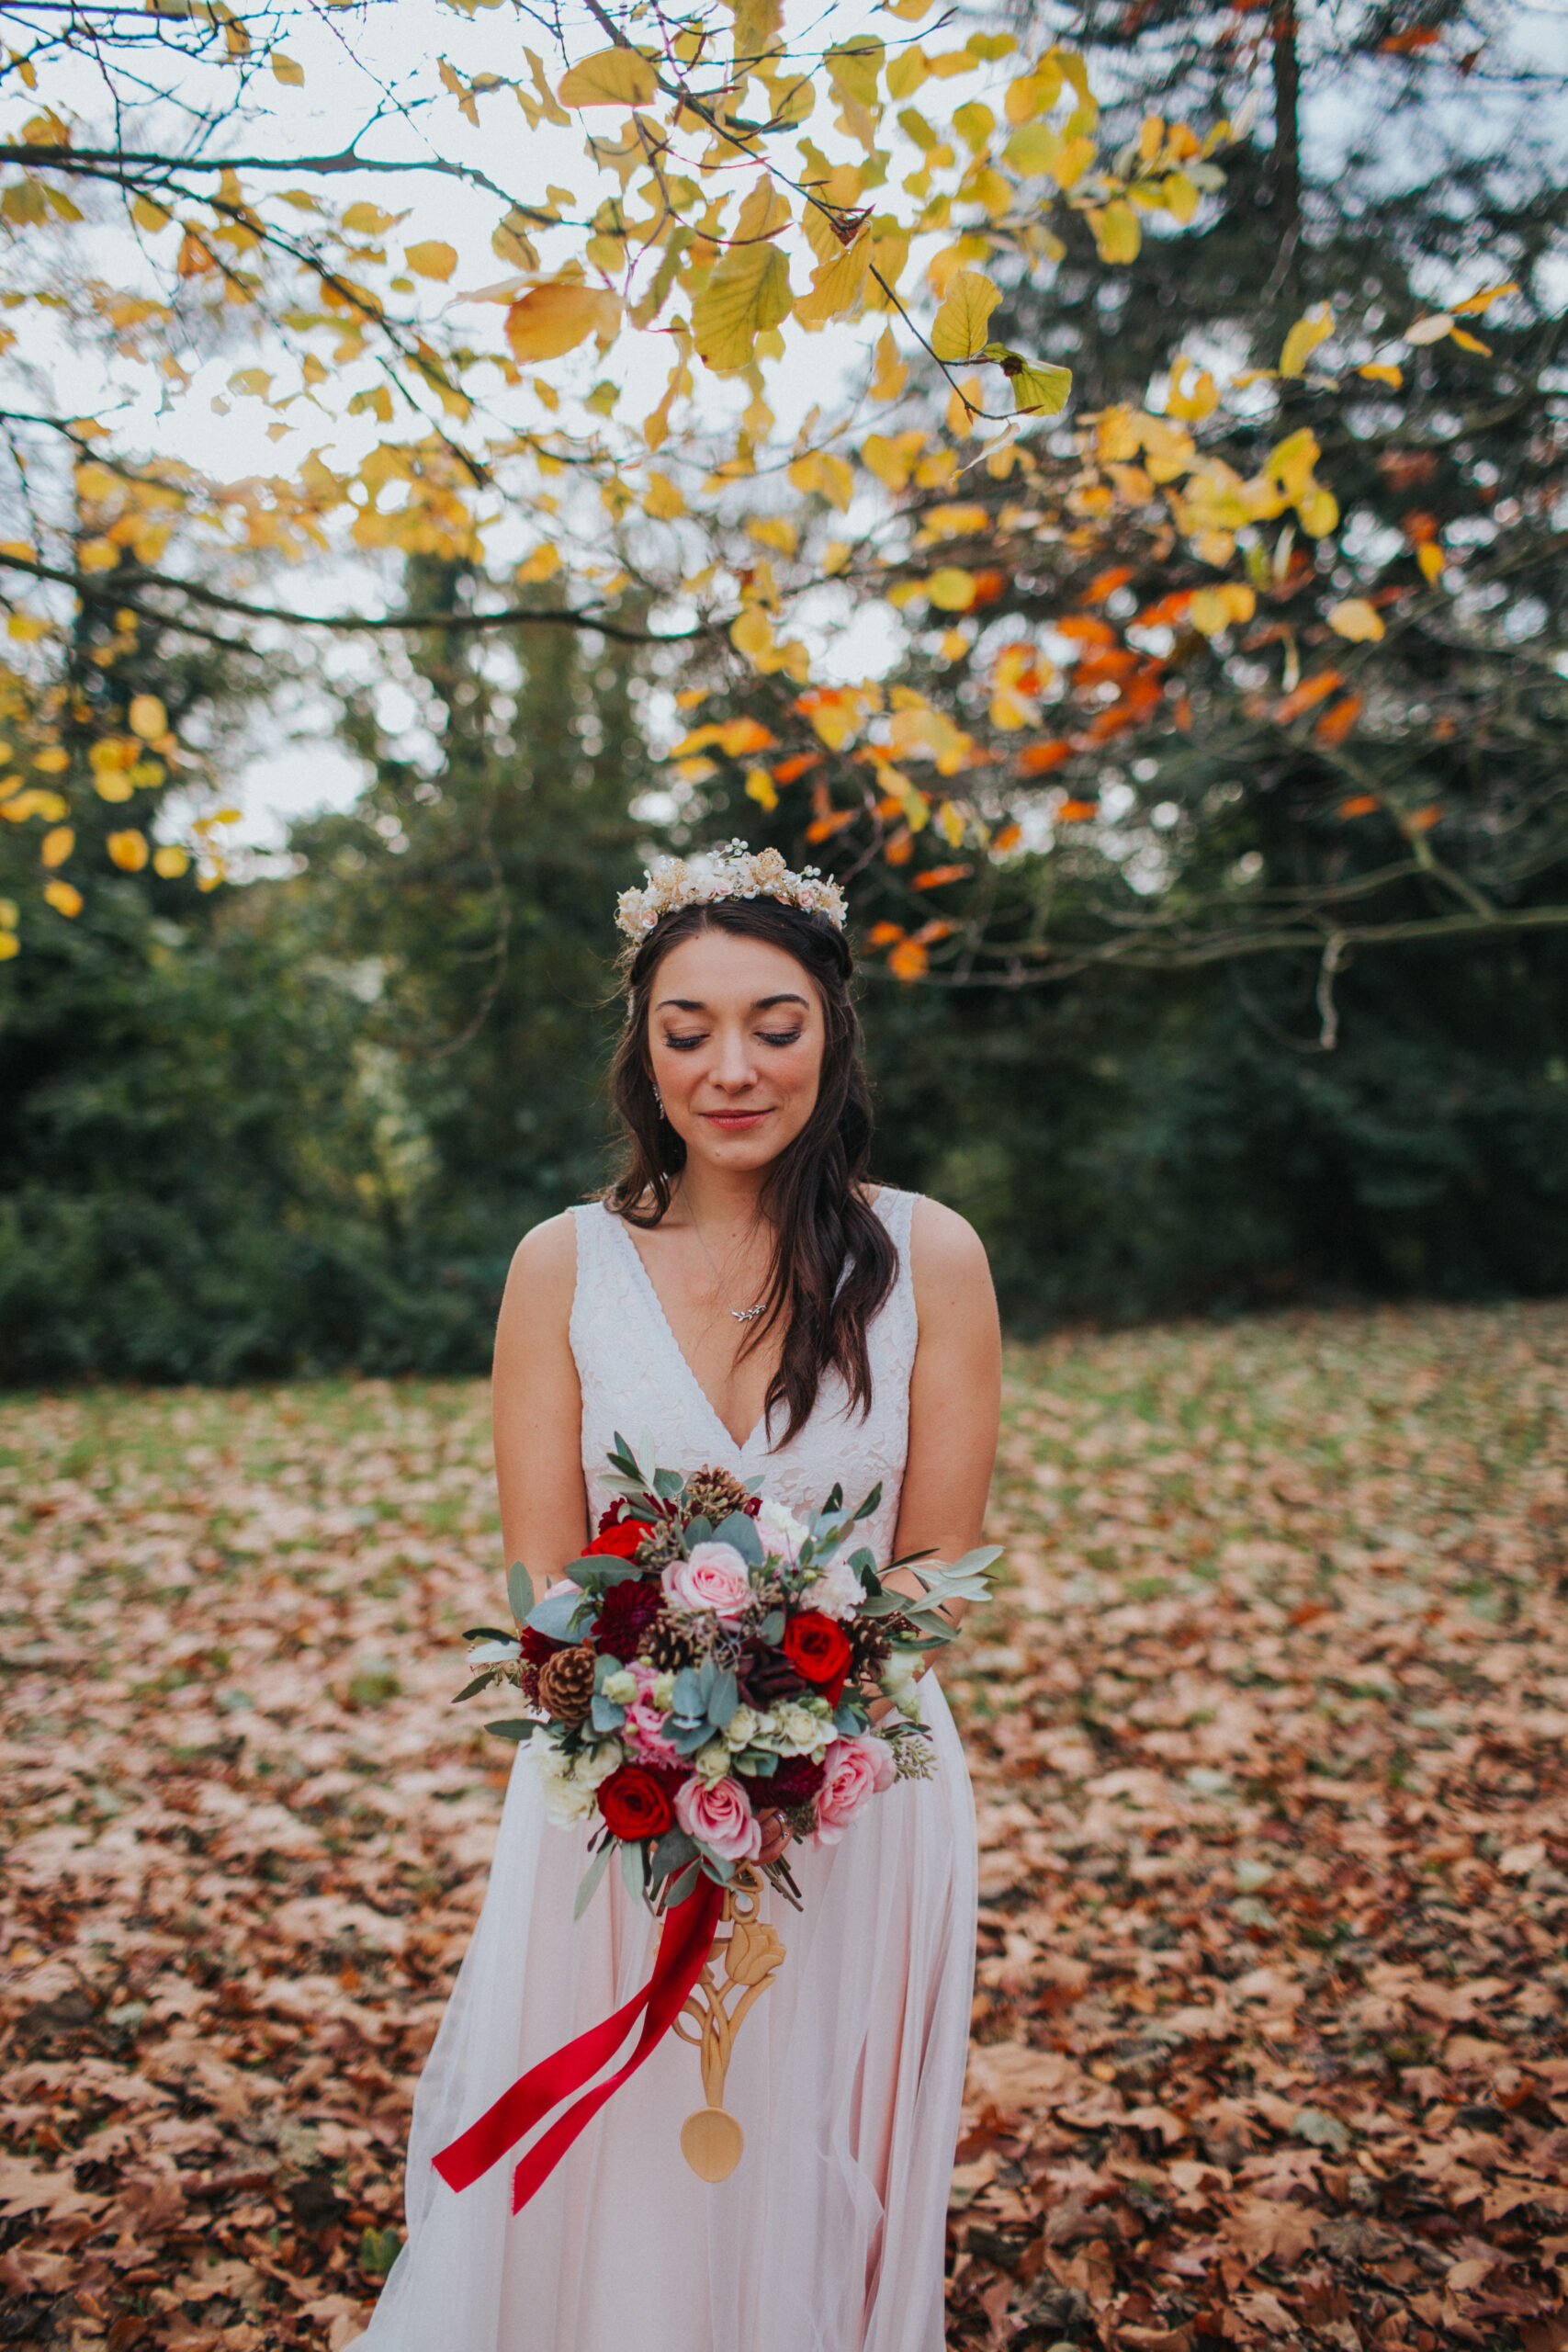 Golden leaves backdrop the bride's stunning autumnal bouquet